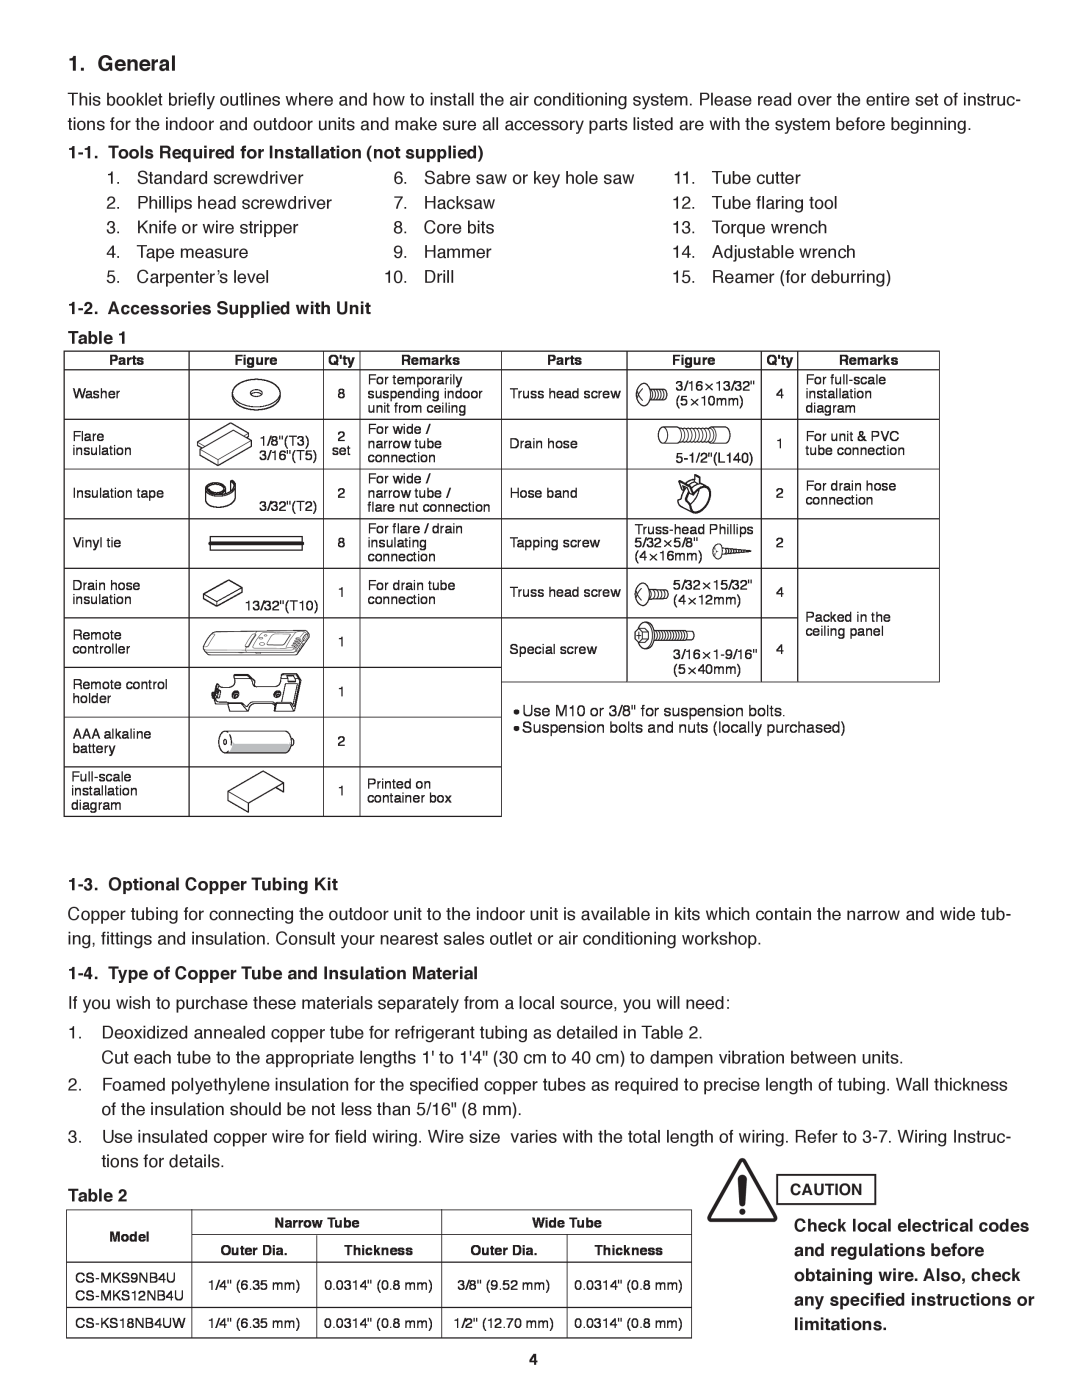 Panasonic R410A service manual General, Tools Required for Installation not supplied, Accessories Supplied with Unit Table 